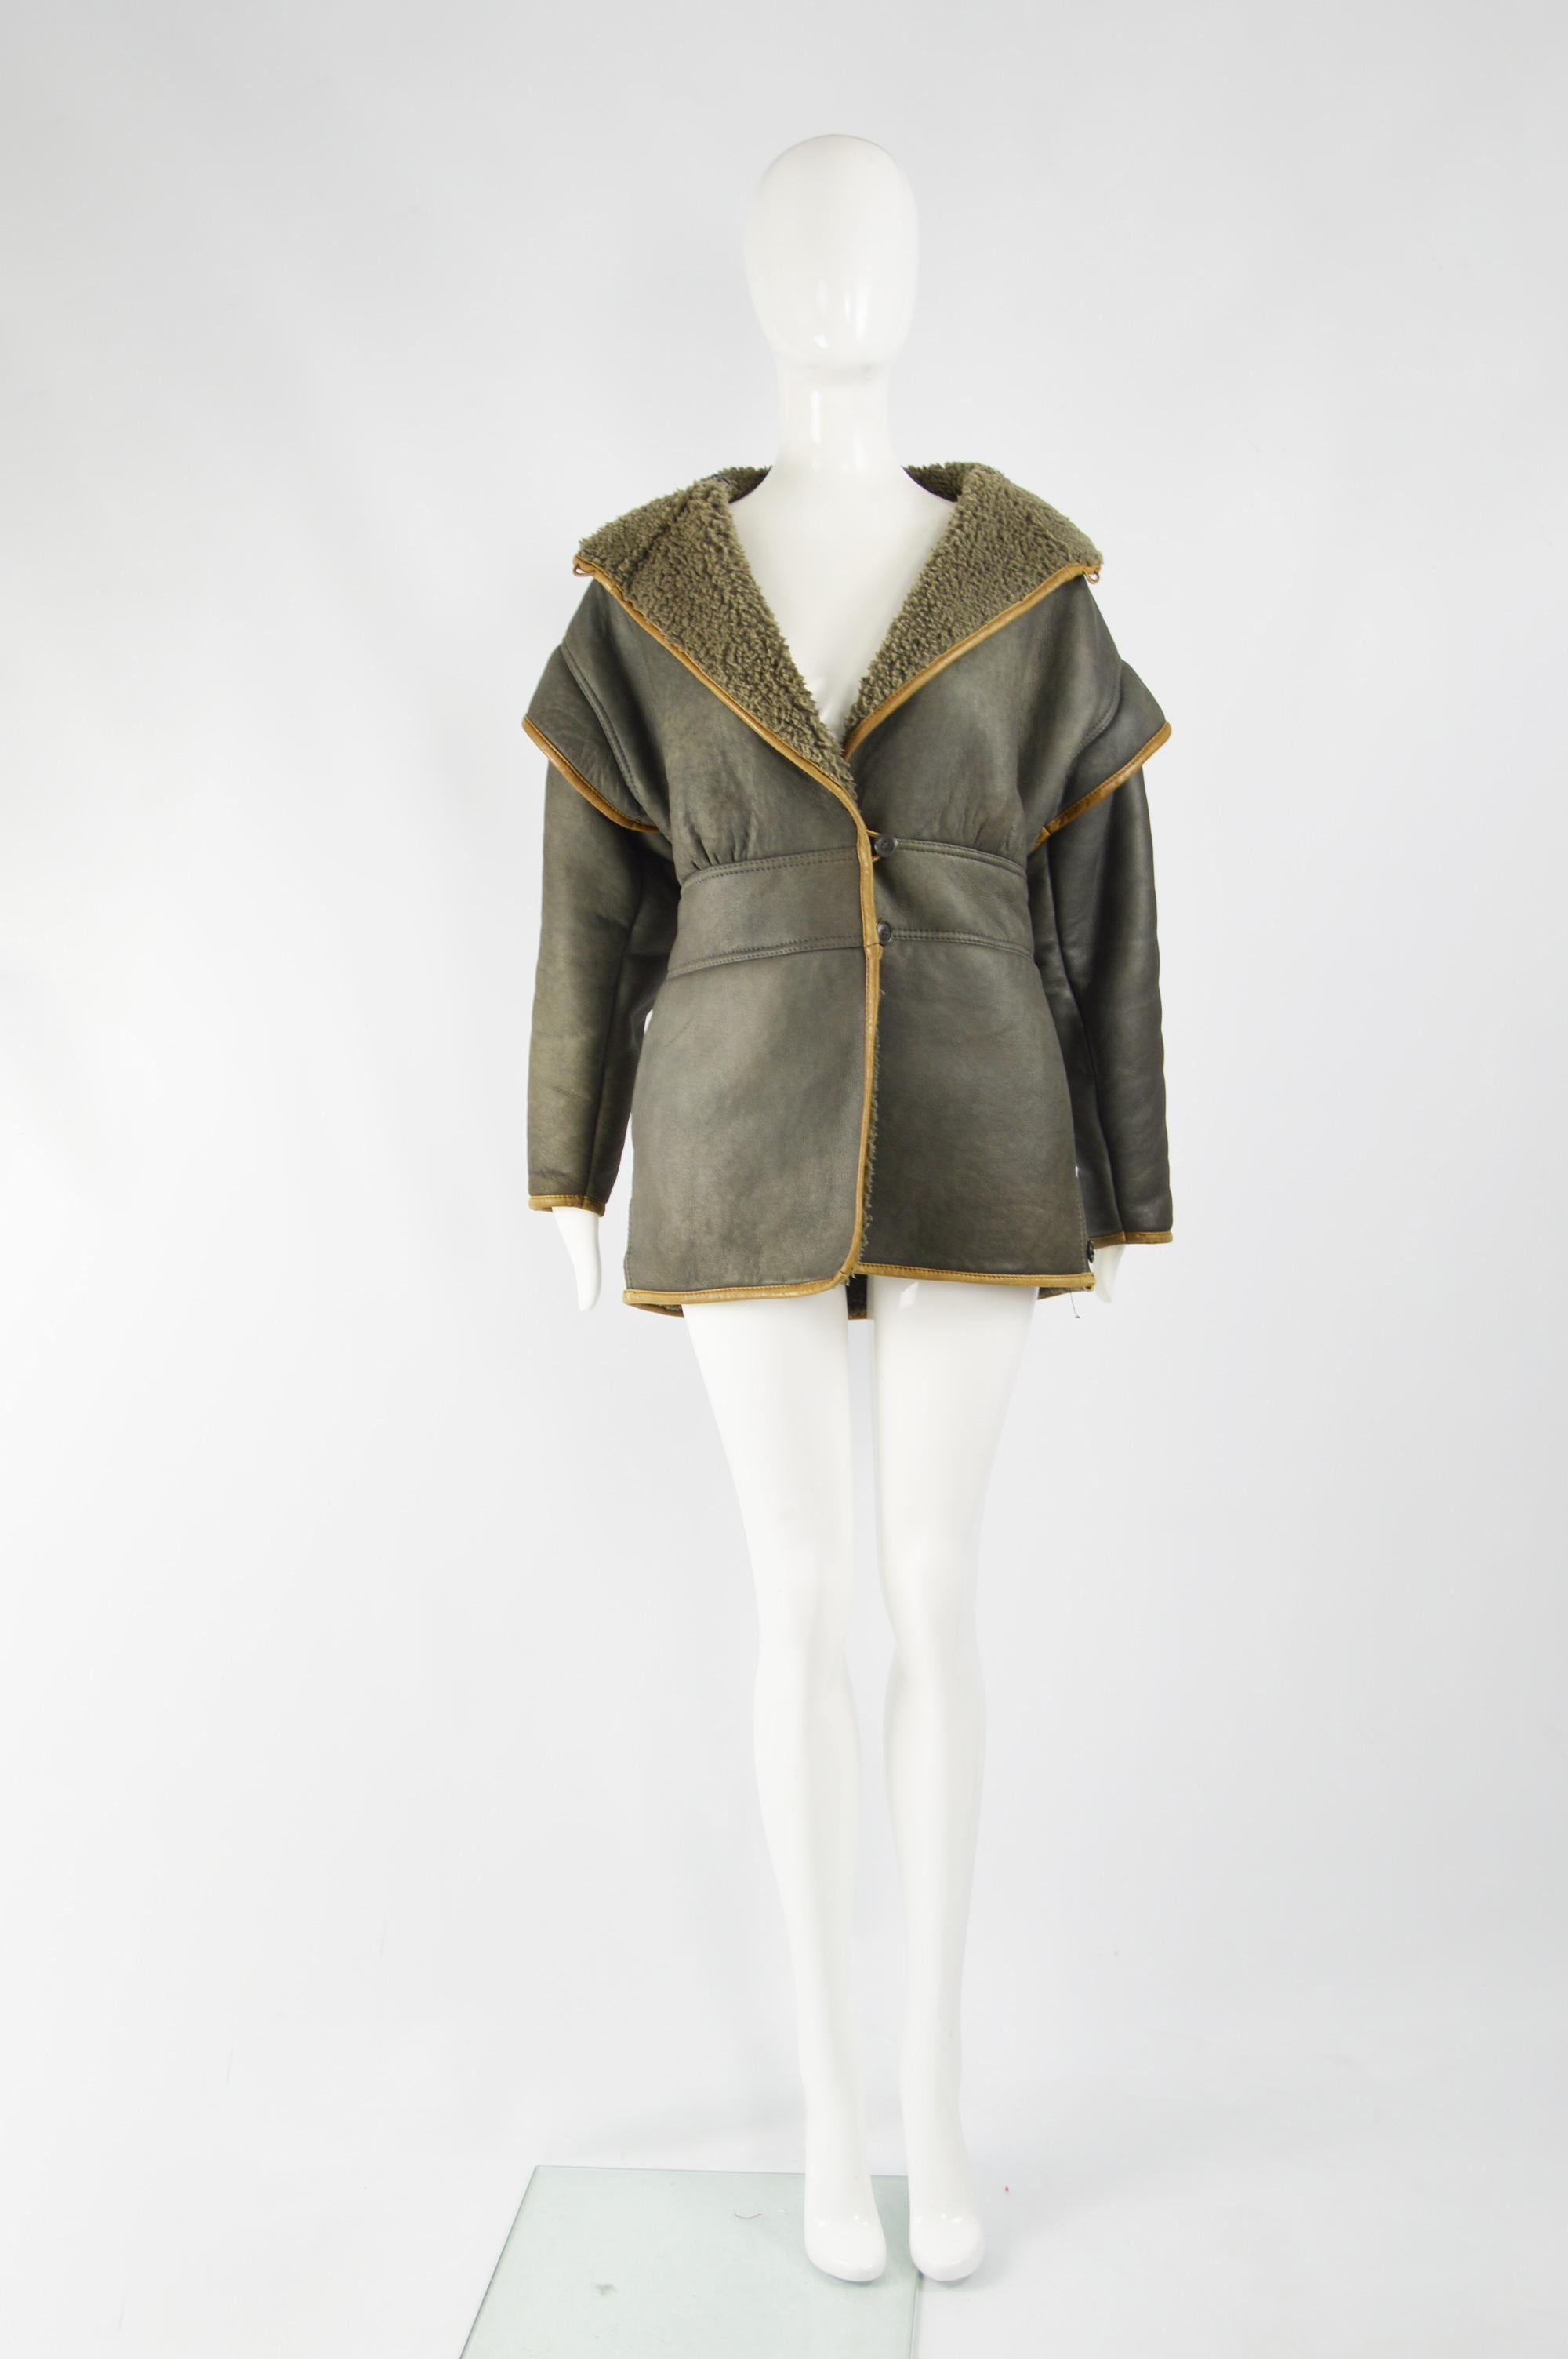 An amazing and rare vintage womens Giorgio Armani jacket from the 80s. In a grey shearling / sheepskin and leather trim. It has an architectural shape with shoulder caps, a nipped waist and blouson fit on top. 

Size: Marked IT 40 but fits more like